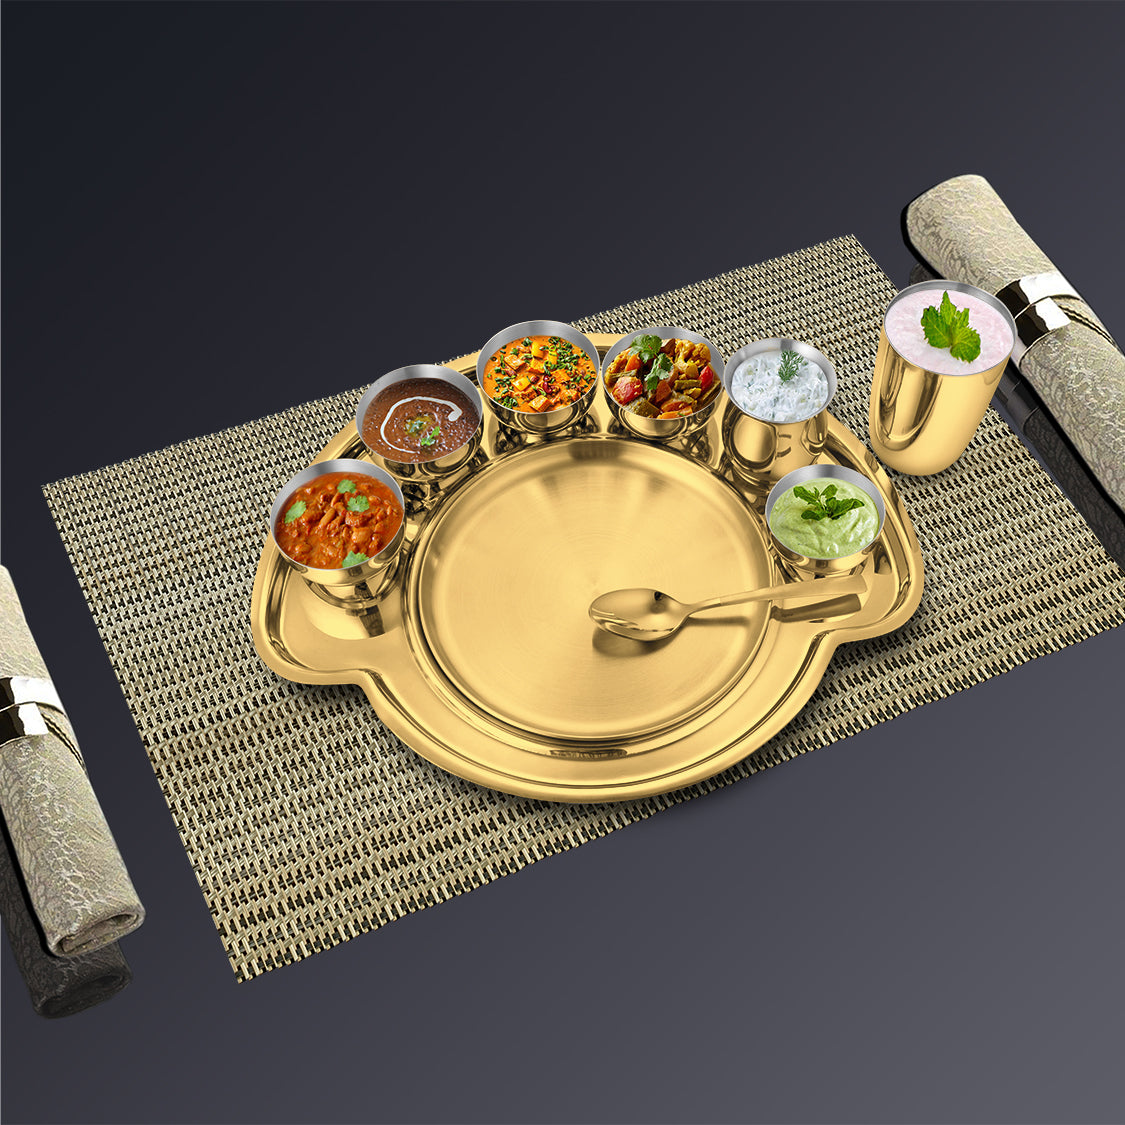 Stainless Steel Small Thali Set with Gold PVD Coating Nifty